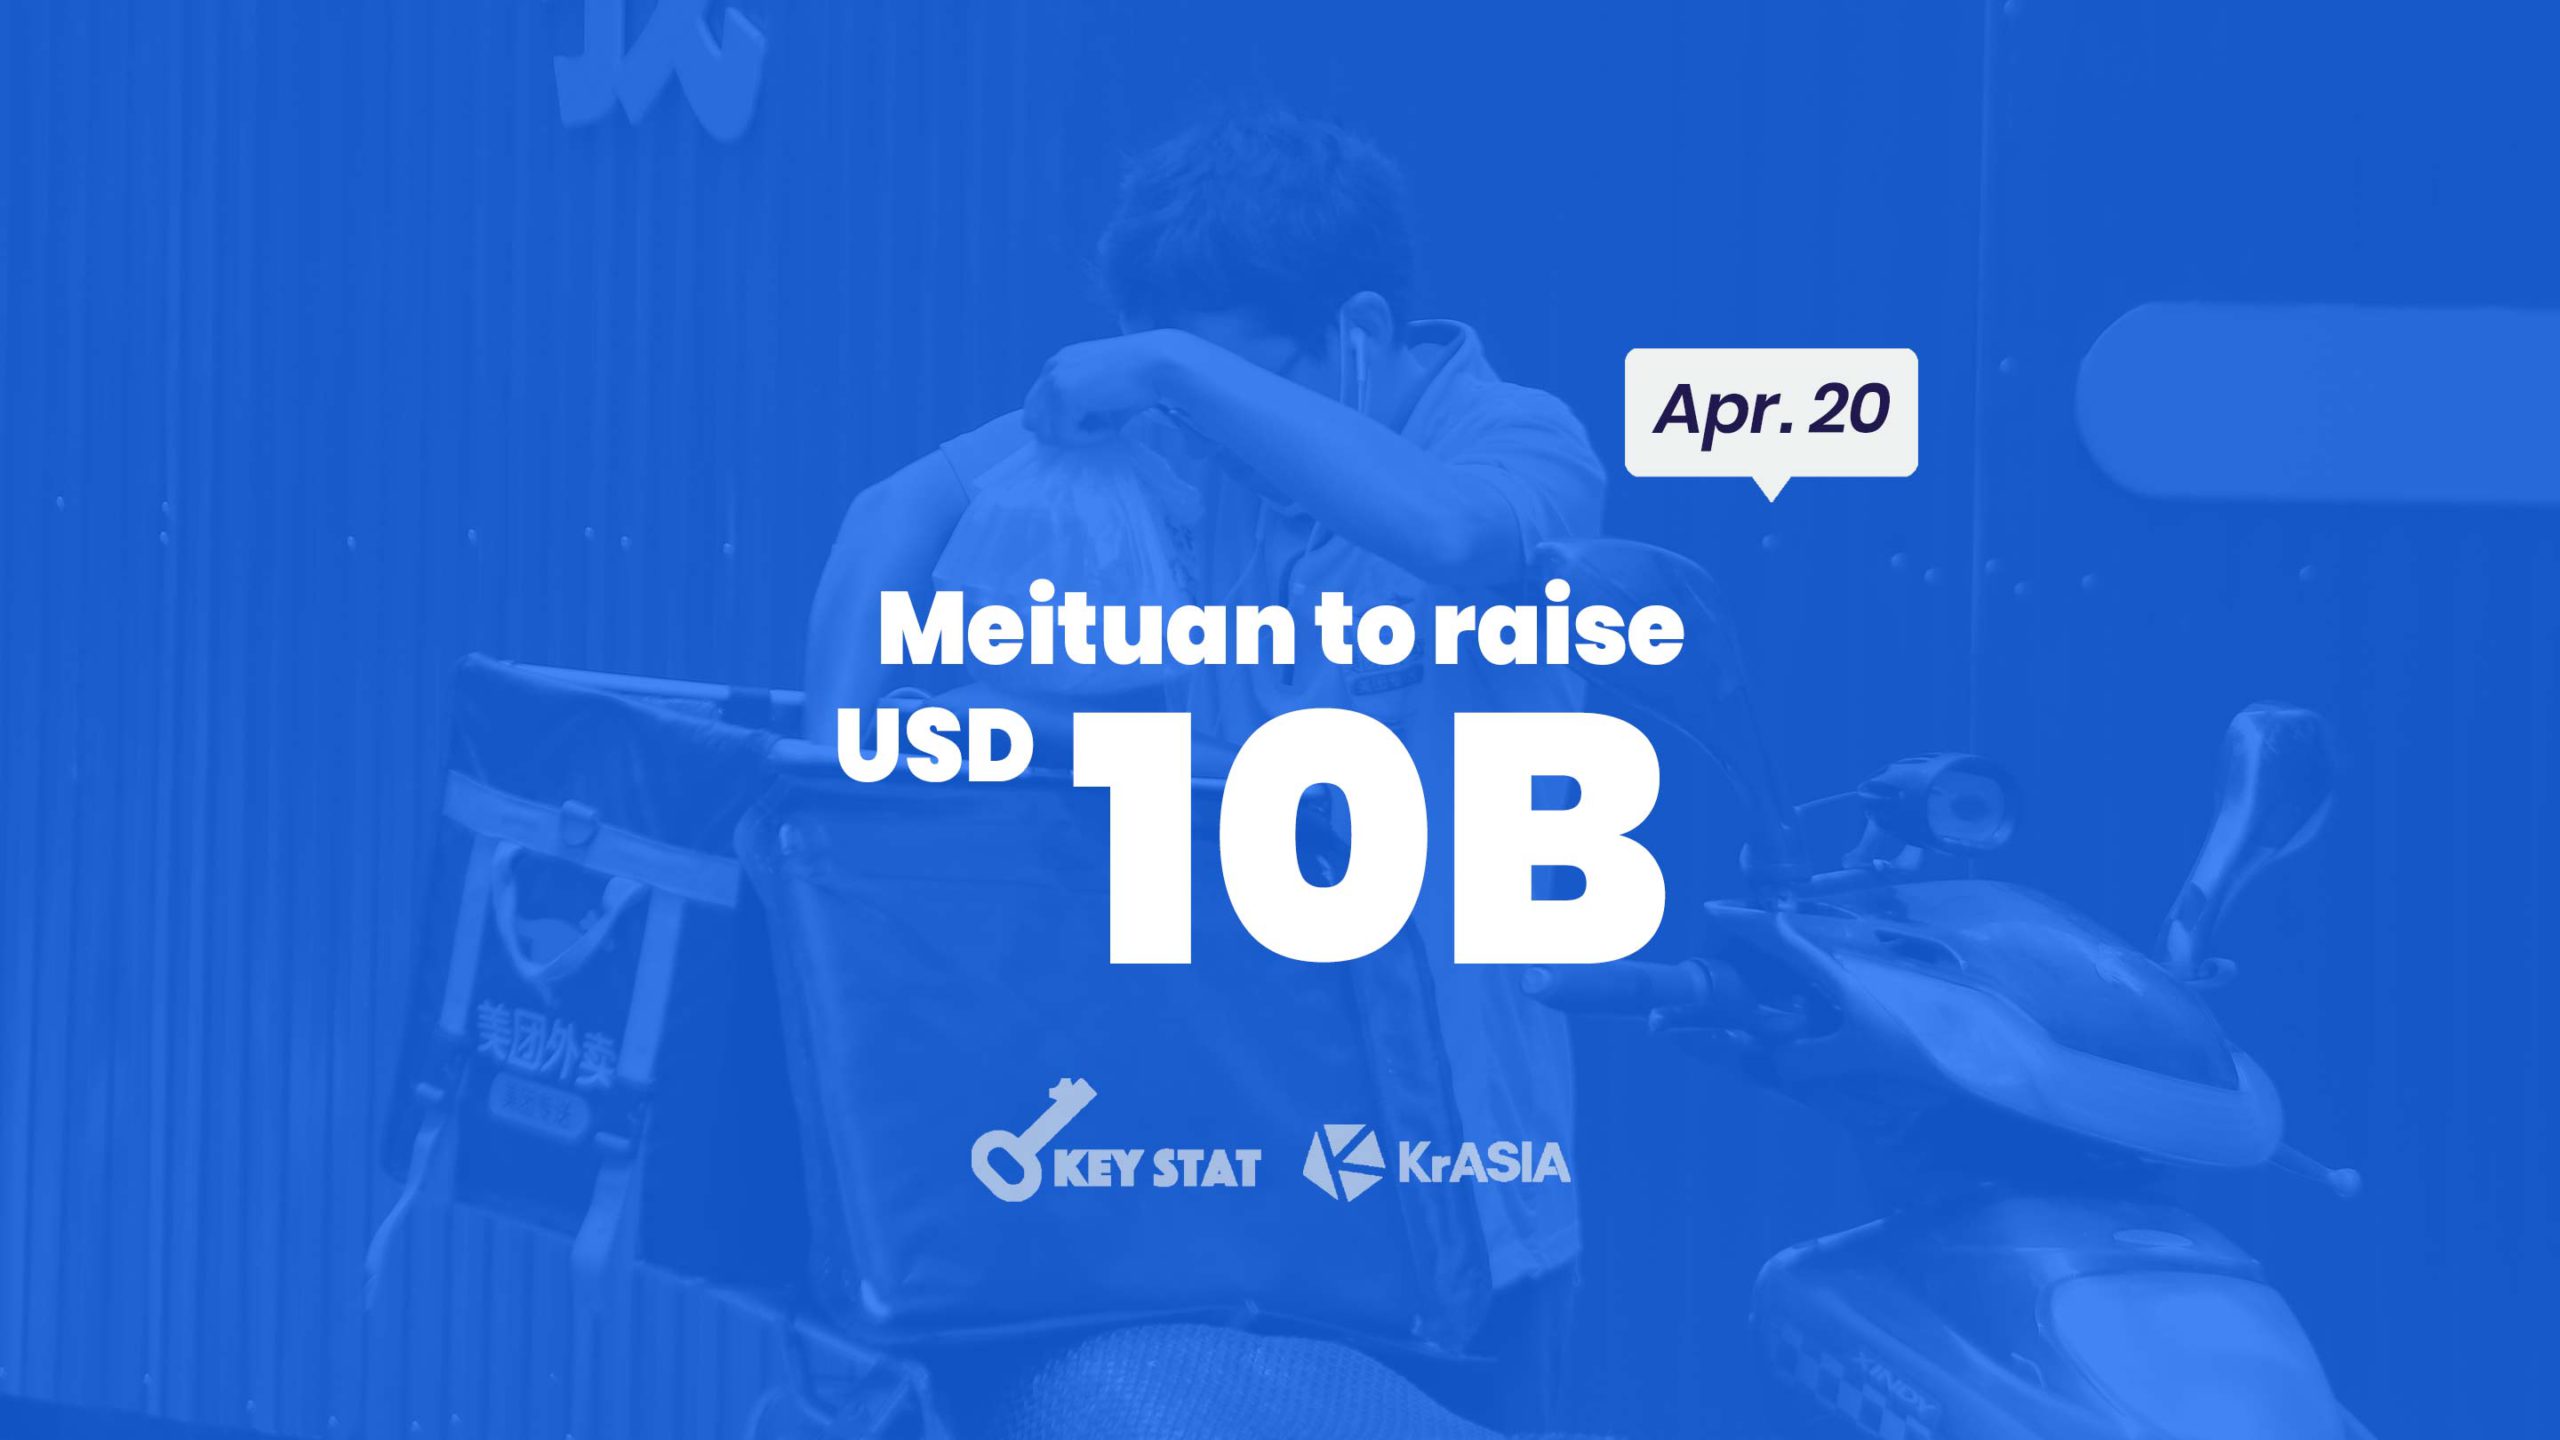 KEY STAT | Meituan raises funds to fend off challengers in lucrative localized lifestyle services